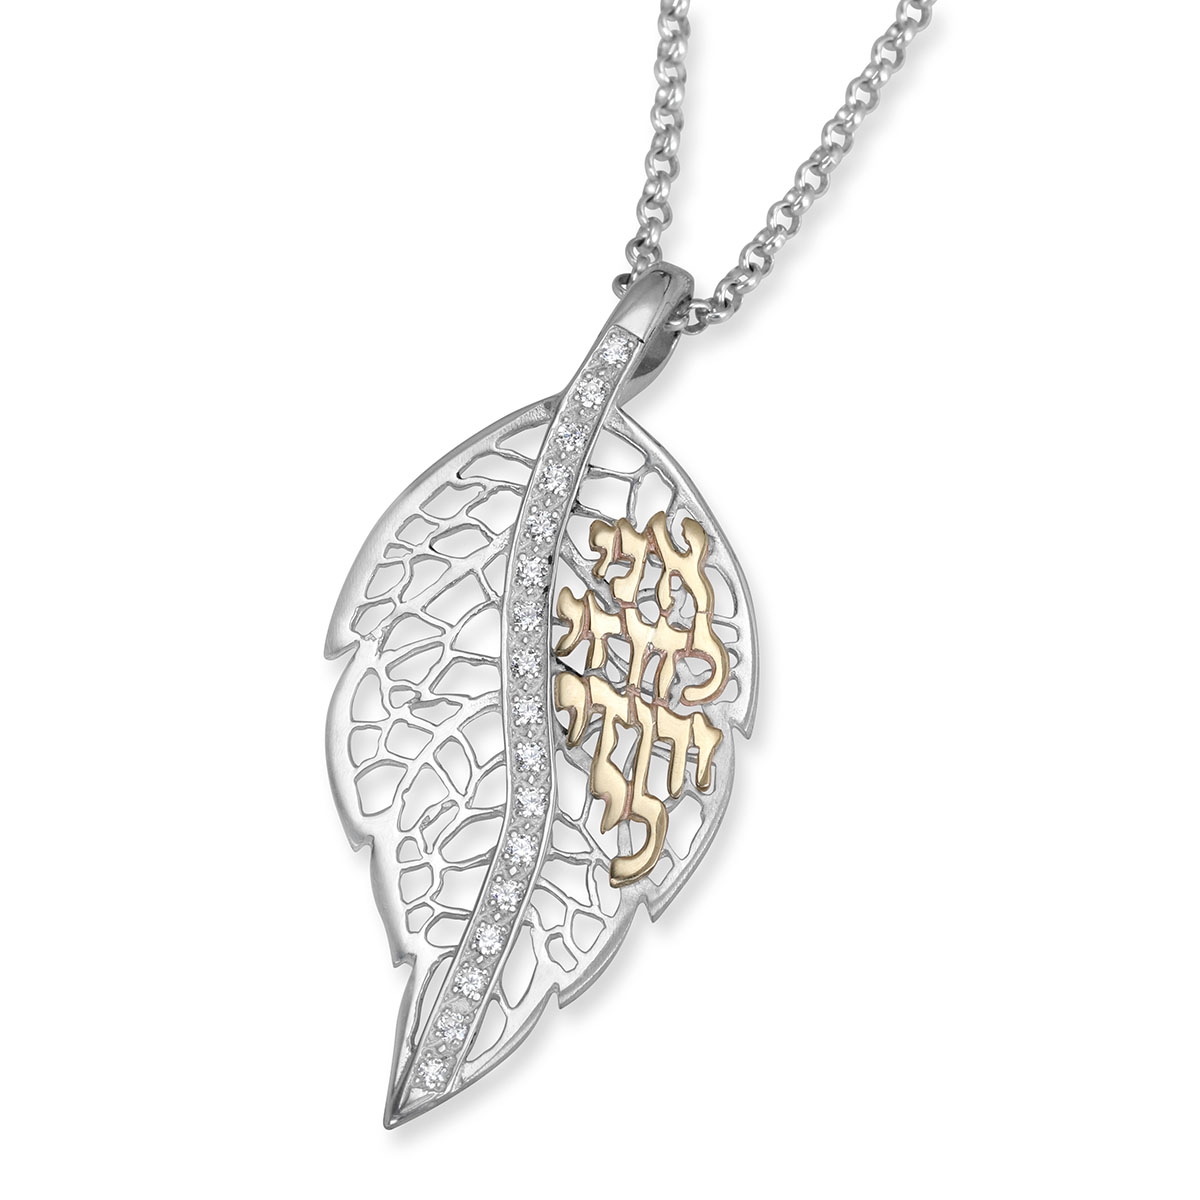 Beloved: Sterling Silver and Gold Leaf Necklace - Song of Songs 6:3 - 1